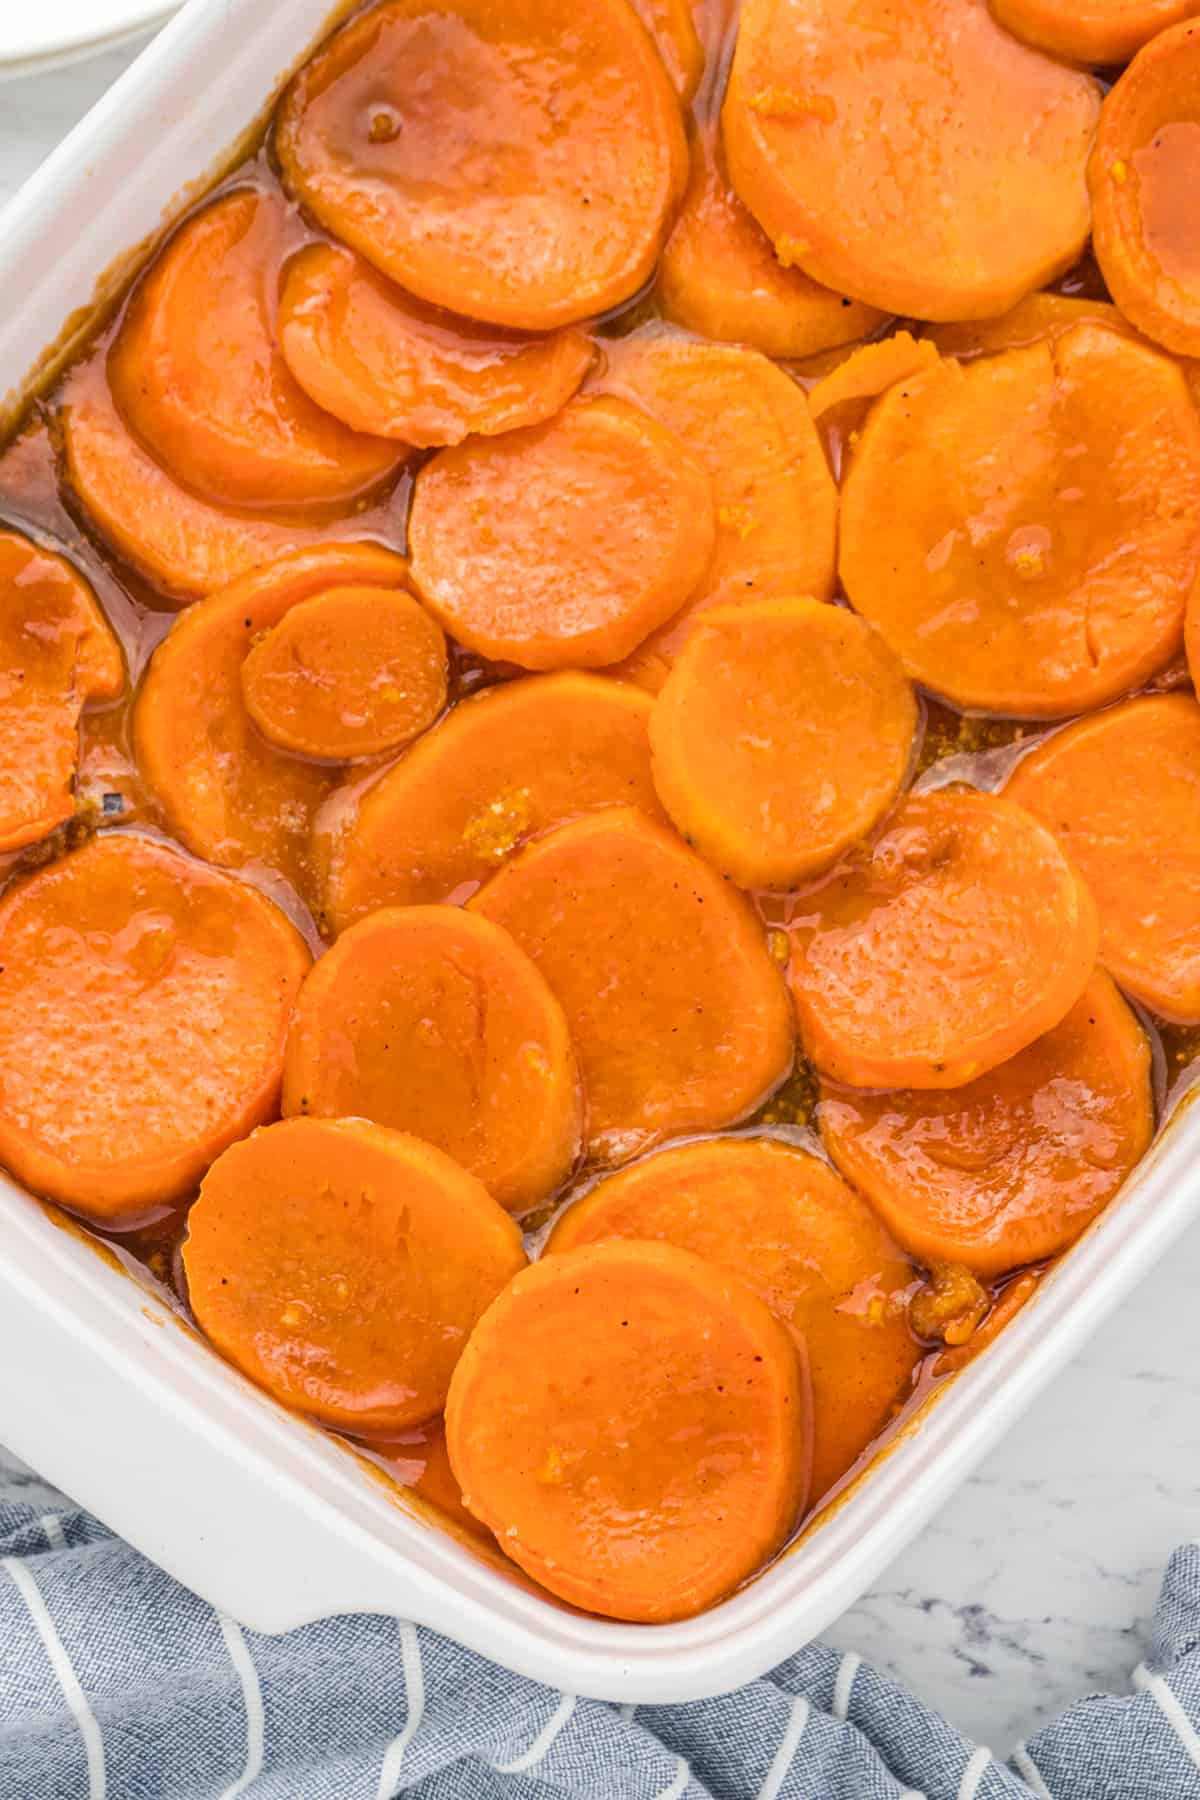 A white baking dish of sliced candied yams in syrup.